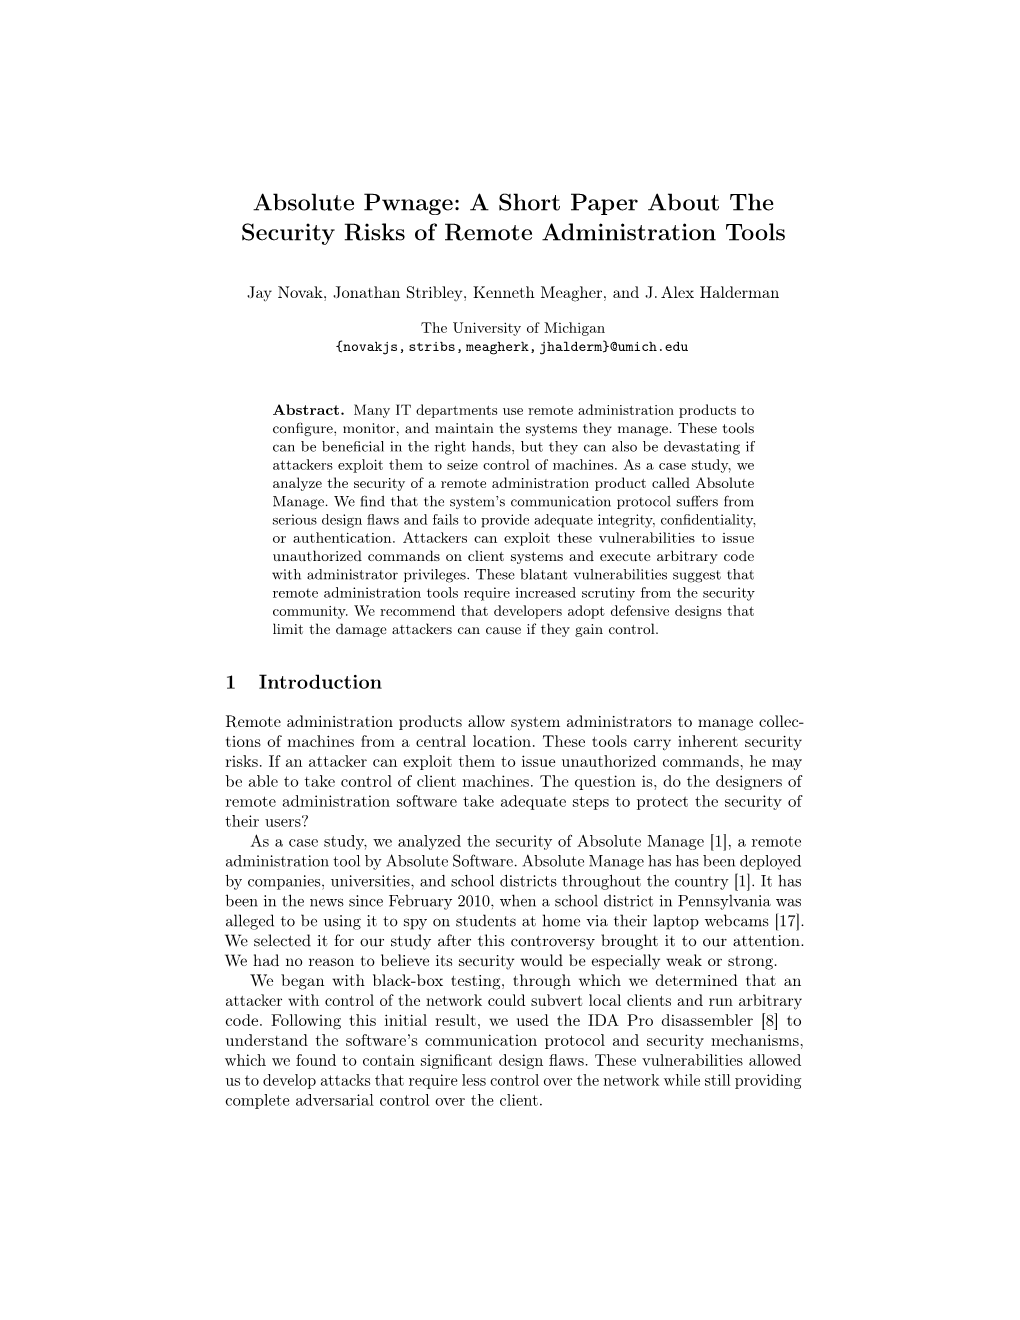 Absolute Pwnage: a Short Paper About the Security Risks of Remote Administration Tools